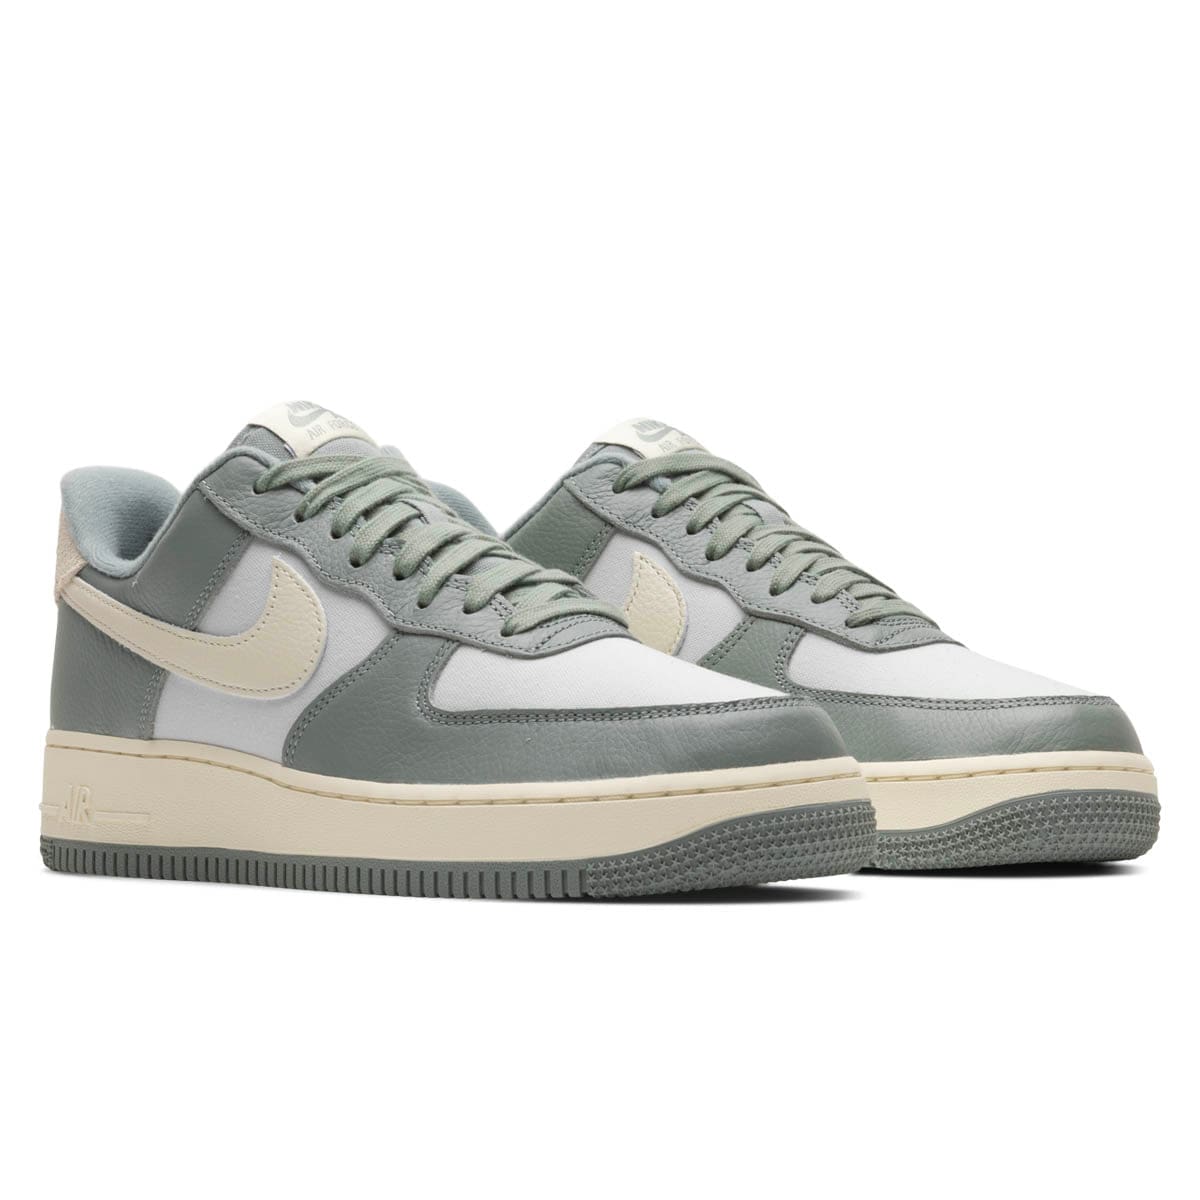 Nike Air Force 1 '07 LV8 2 Men's Shoe Size 11.5 (Atmosphere Grey)